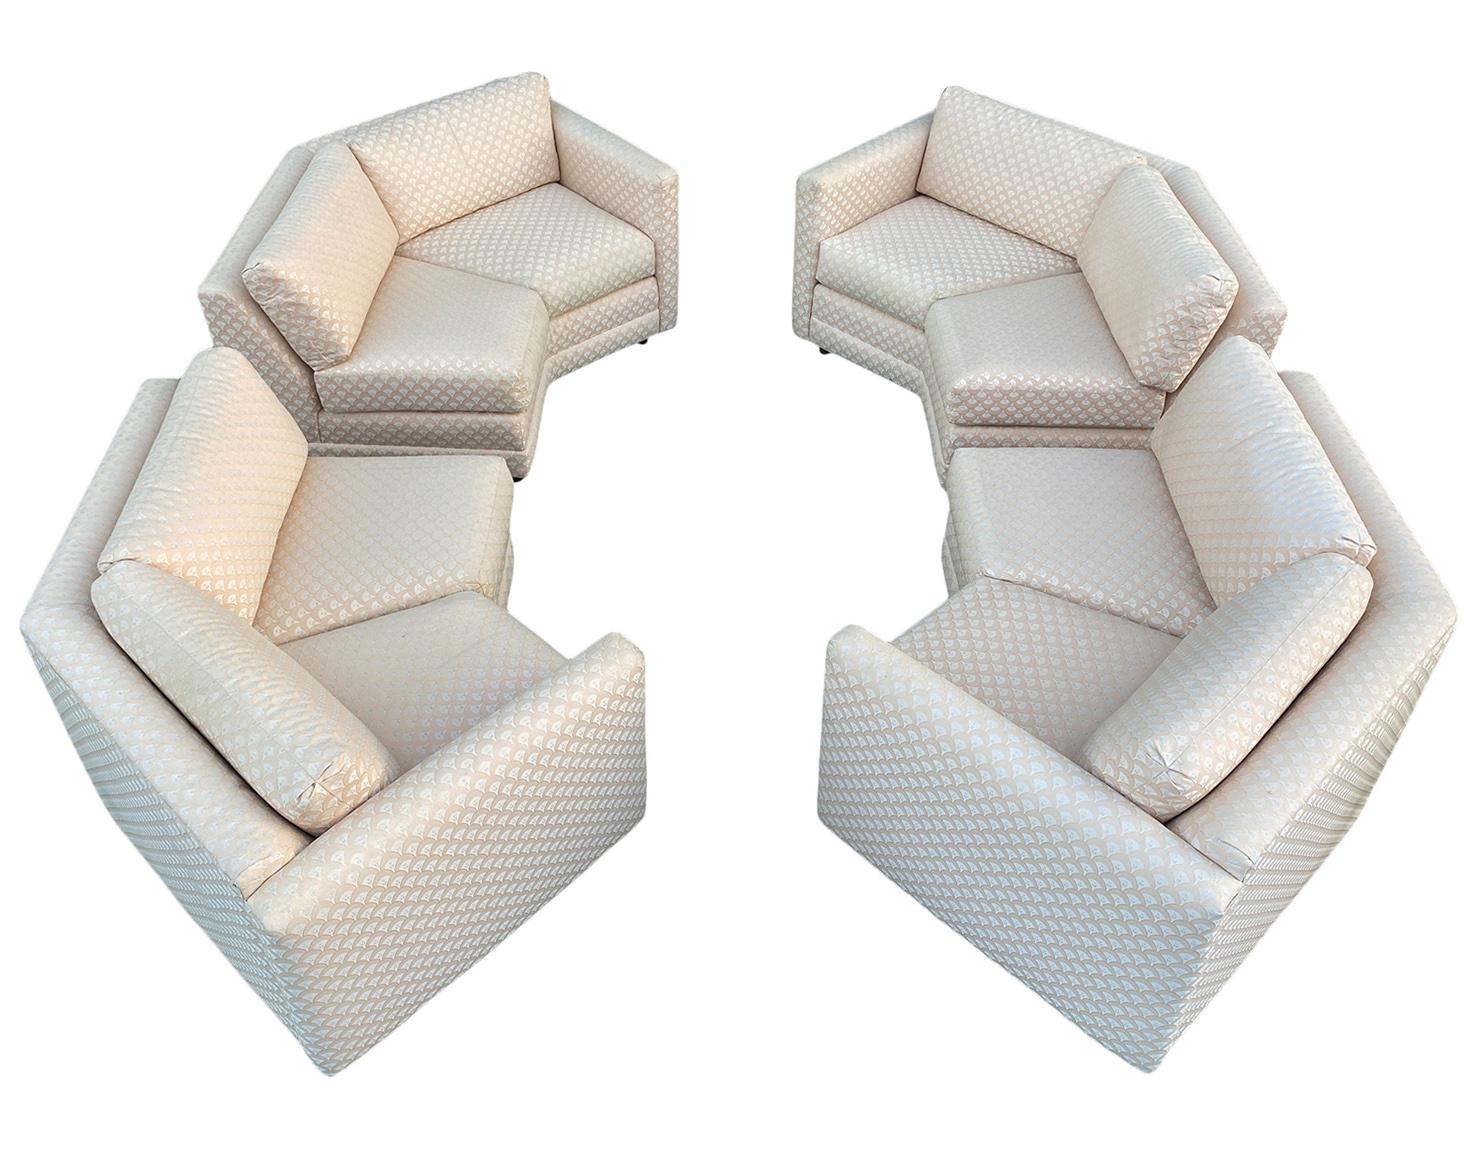 Late 20th Century Pair of Mid-Century Modern Octagonal Curved or Circular Sectional Sofas